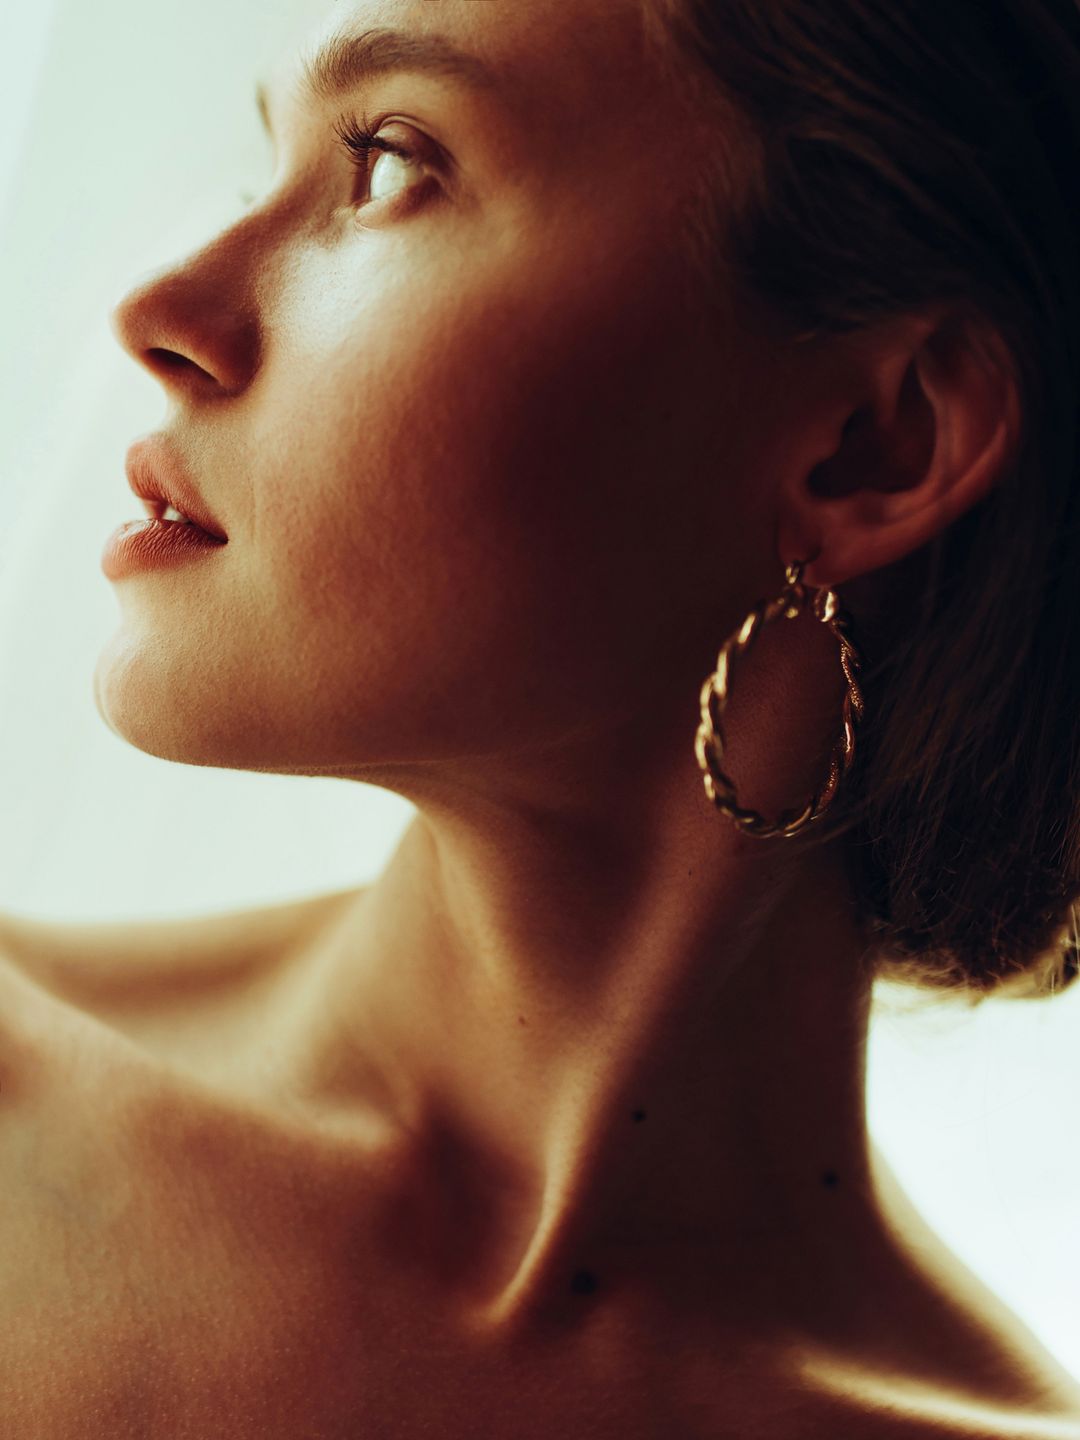 Profile view of beautiful woman with earring